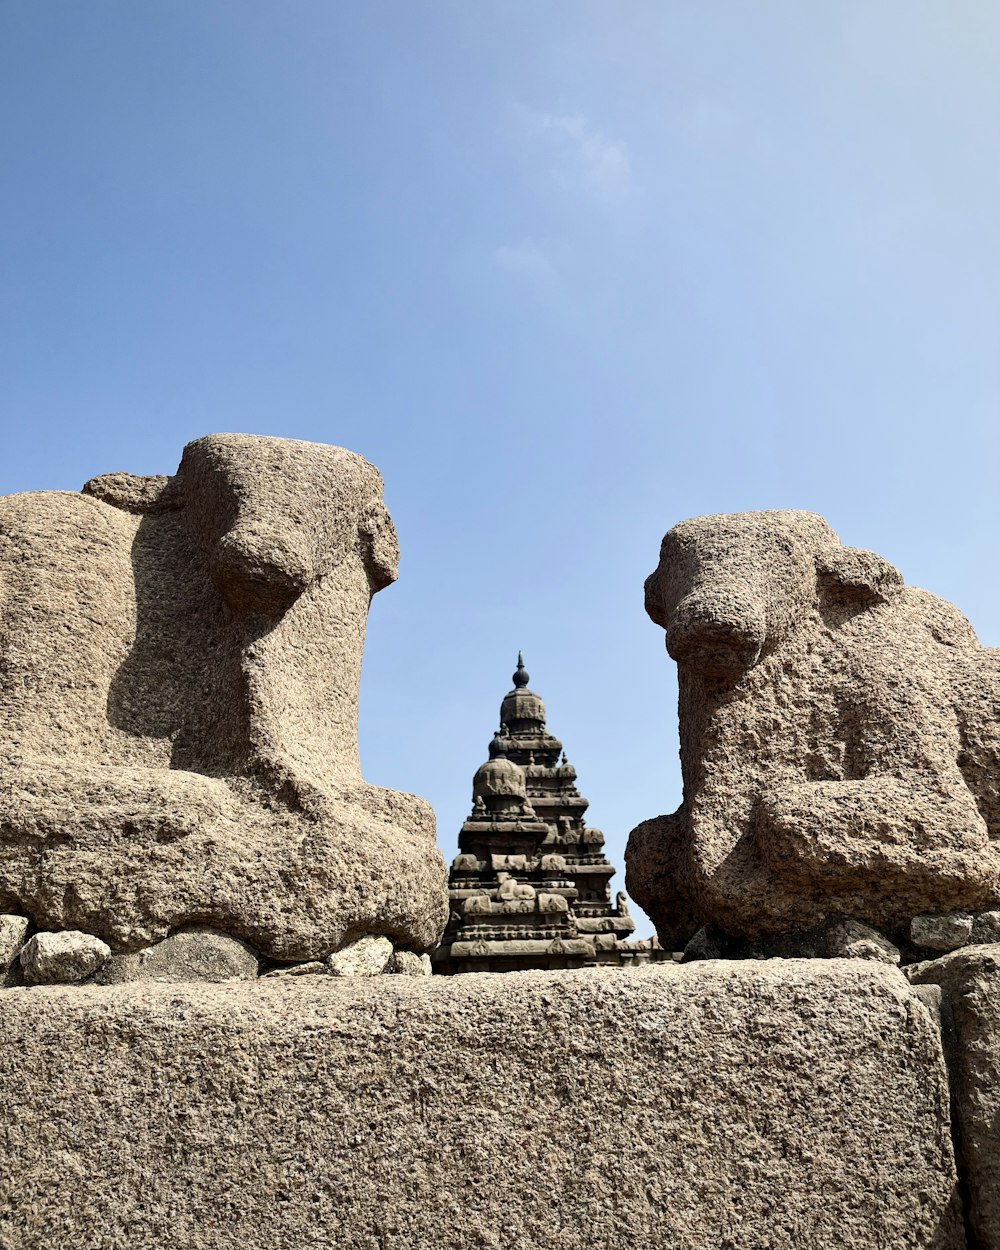 a group of stone sculptures sitting on top of a stone wall